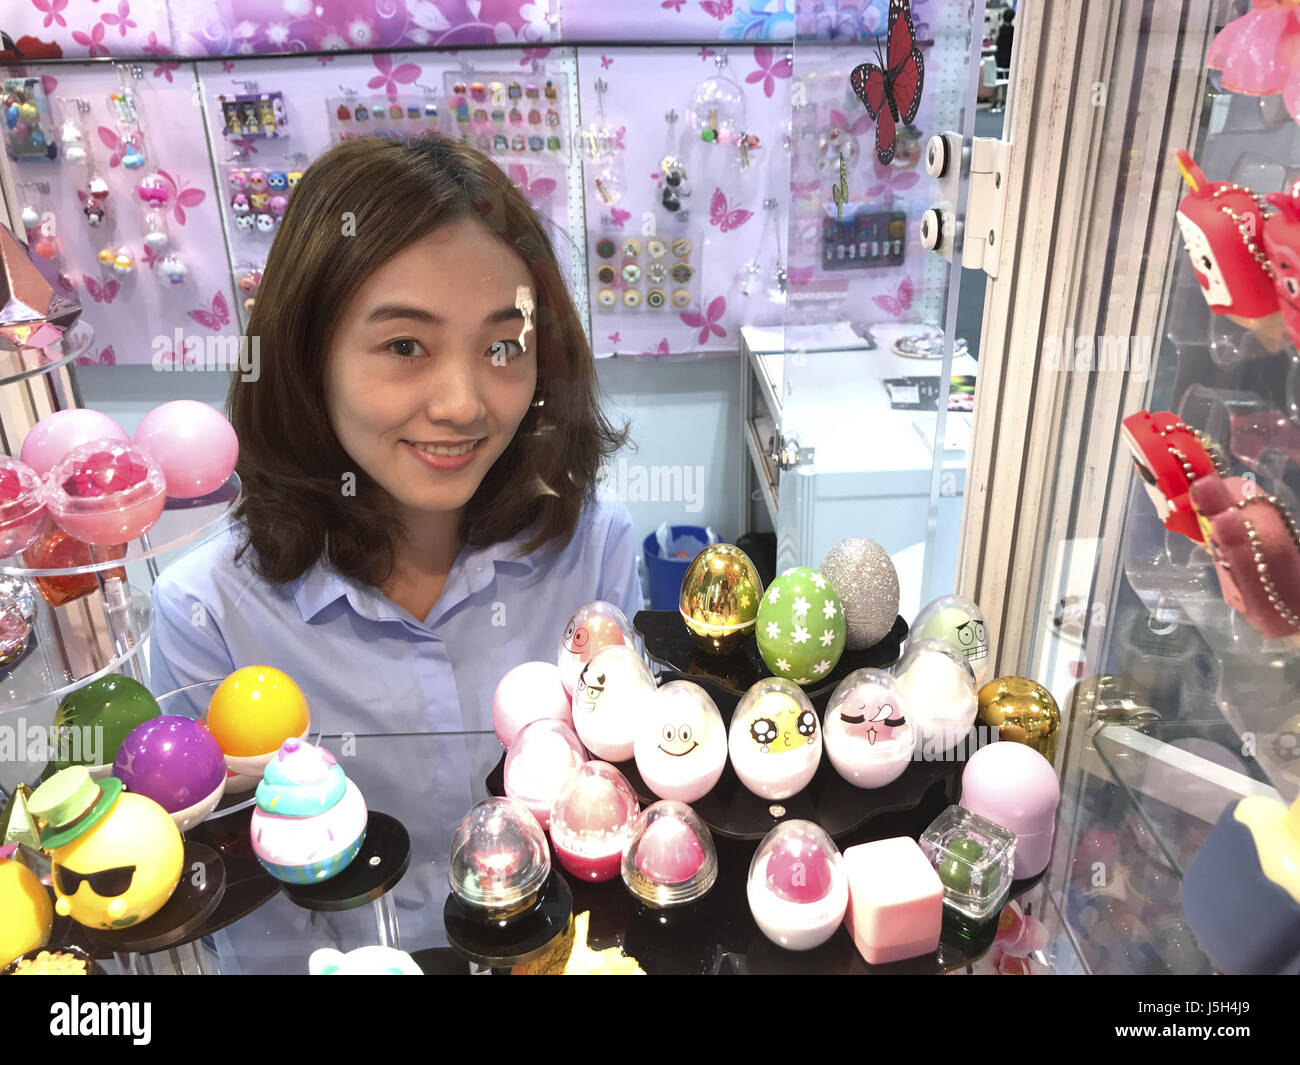 May 16, 2017 - Tokyo, Japan - Dana Lee of Taimeng Beauty Accesories from Taiwan during the Tokyo Nail Forum 2017 on Tuesday May 16, 2017. Photo by: Ramiro Agustin Vargas Tabares (Credit Image: © Ramiro Agustin Vargas Tabares via ZUMA Wire) Stock Photo